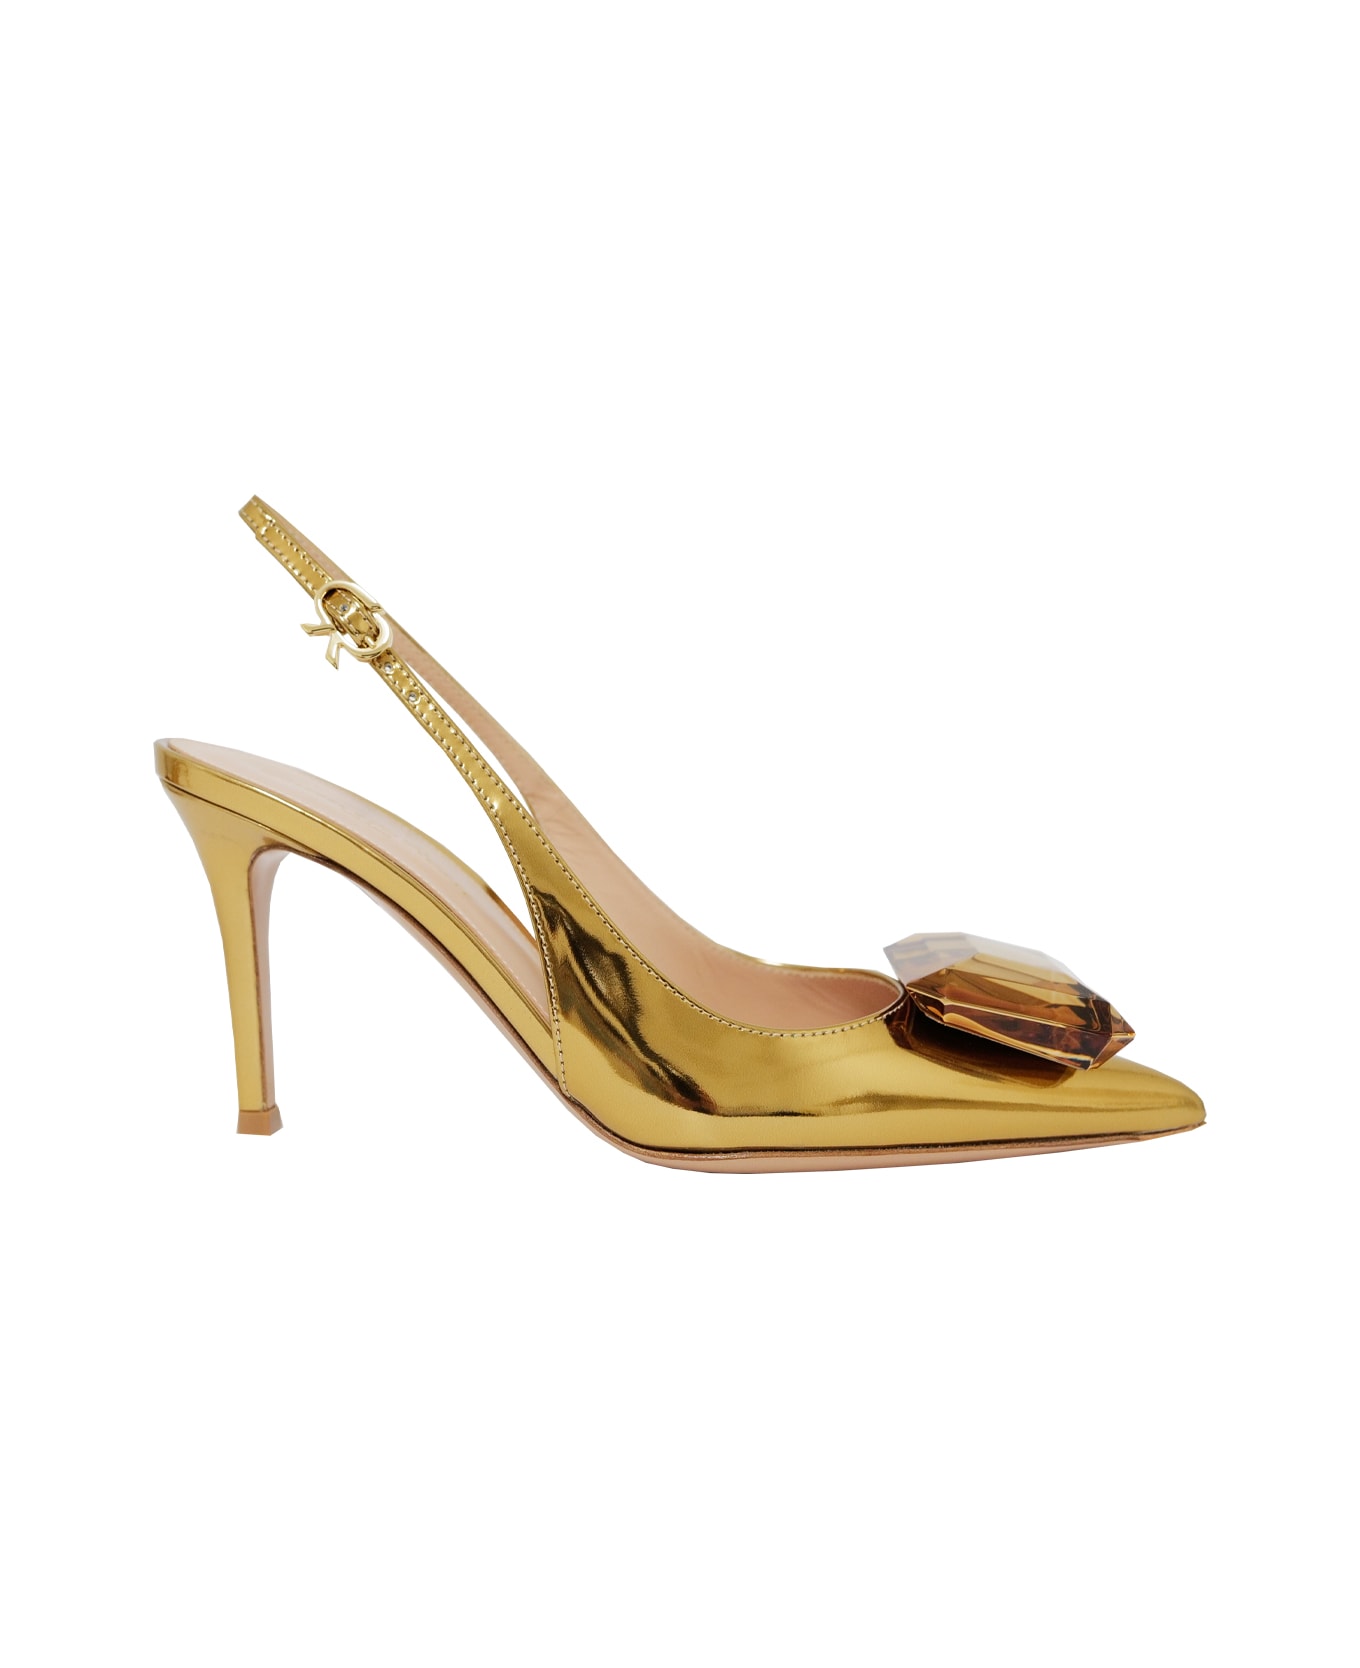 Gianvito Rossi ''jaipur Sling'' Shoes With Heels - Golden ハイヒール